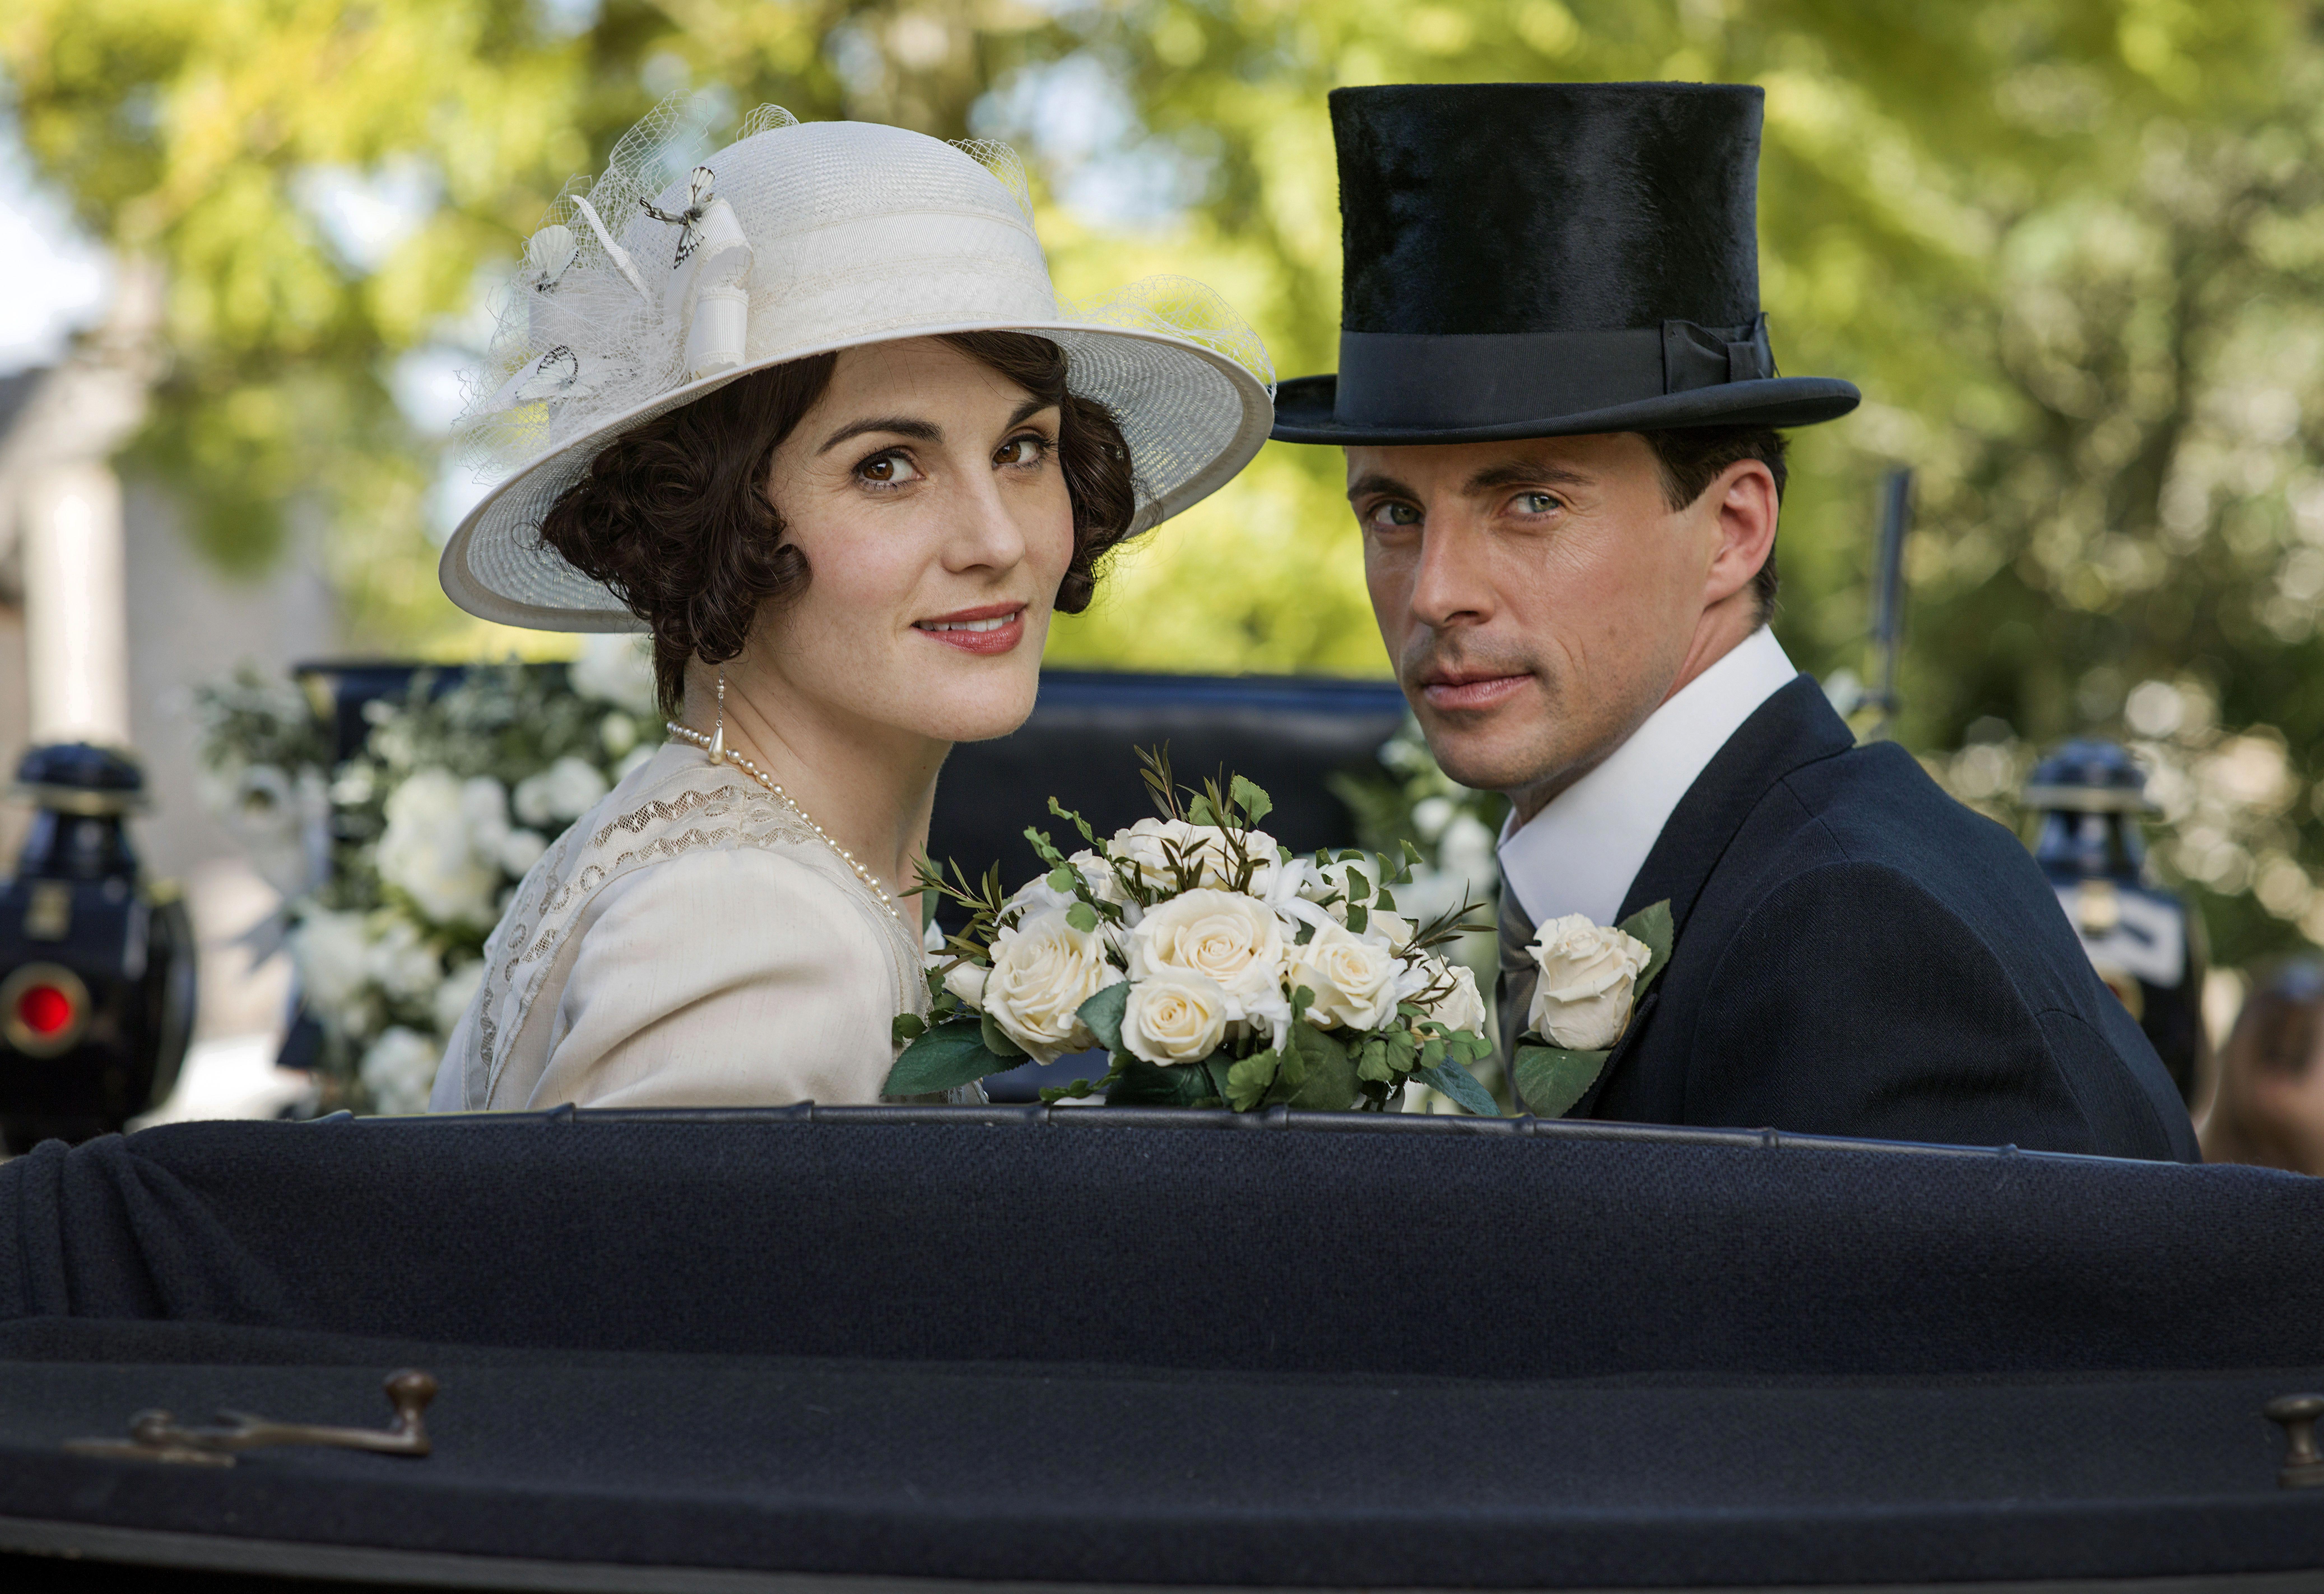 who does mary marry in downton abbey